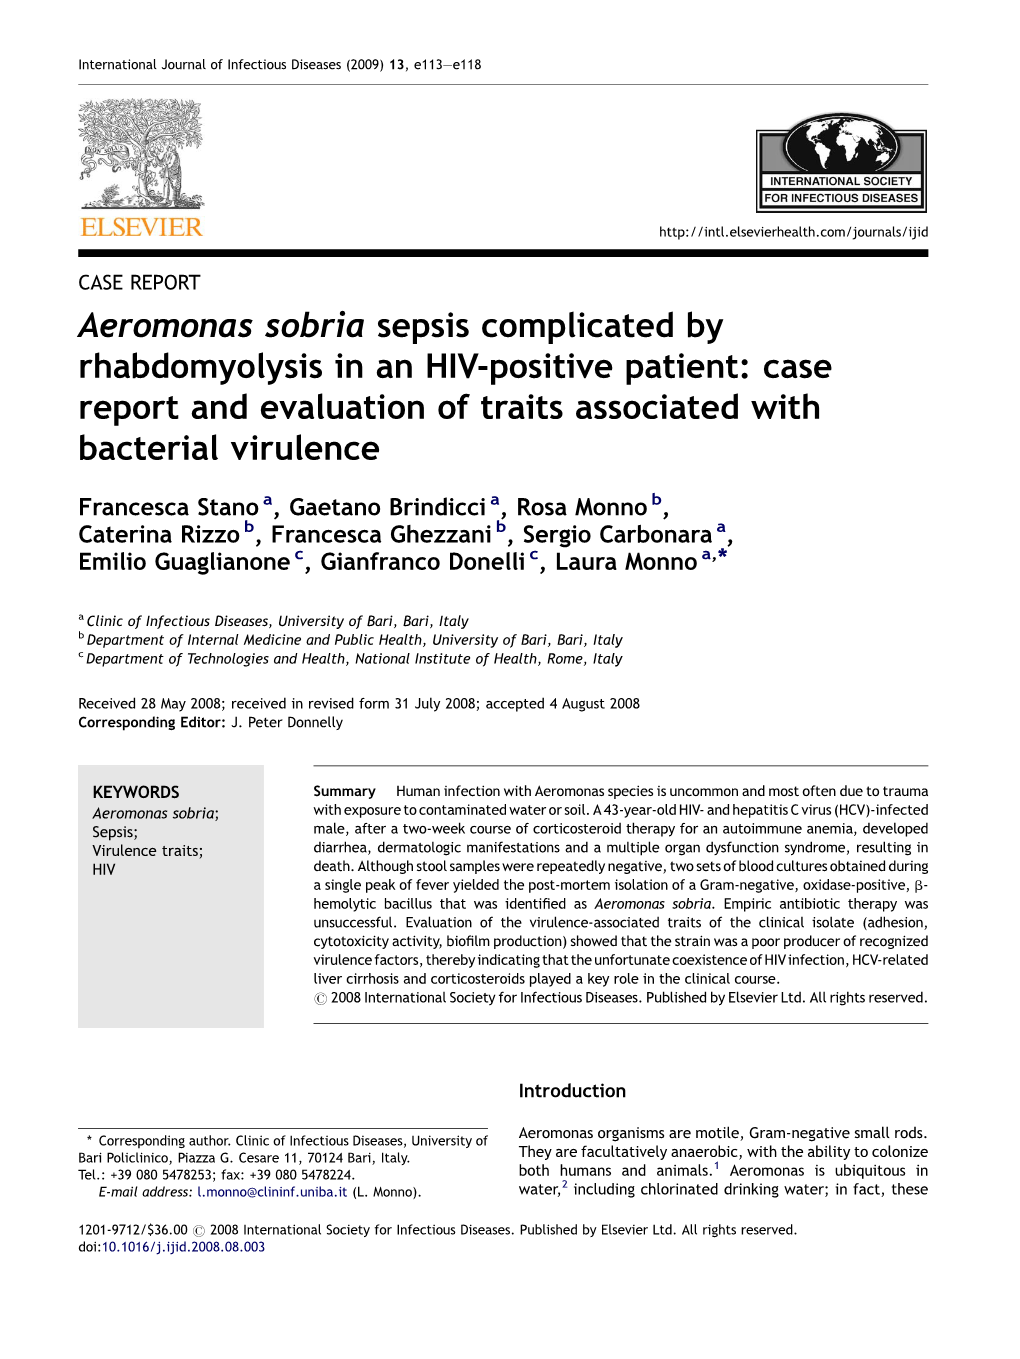 Aeromonas Sobria Sepsis Complicated by Rhabdomyolysis in an HIV-Positive Patient: Case Report and Evaluation of Traits Associated with Bacterial Virulence